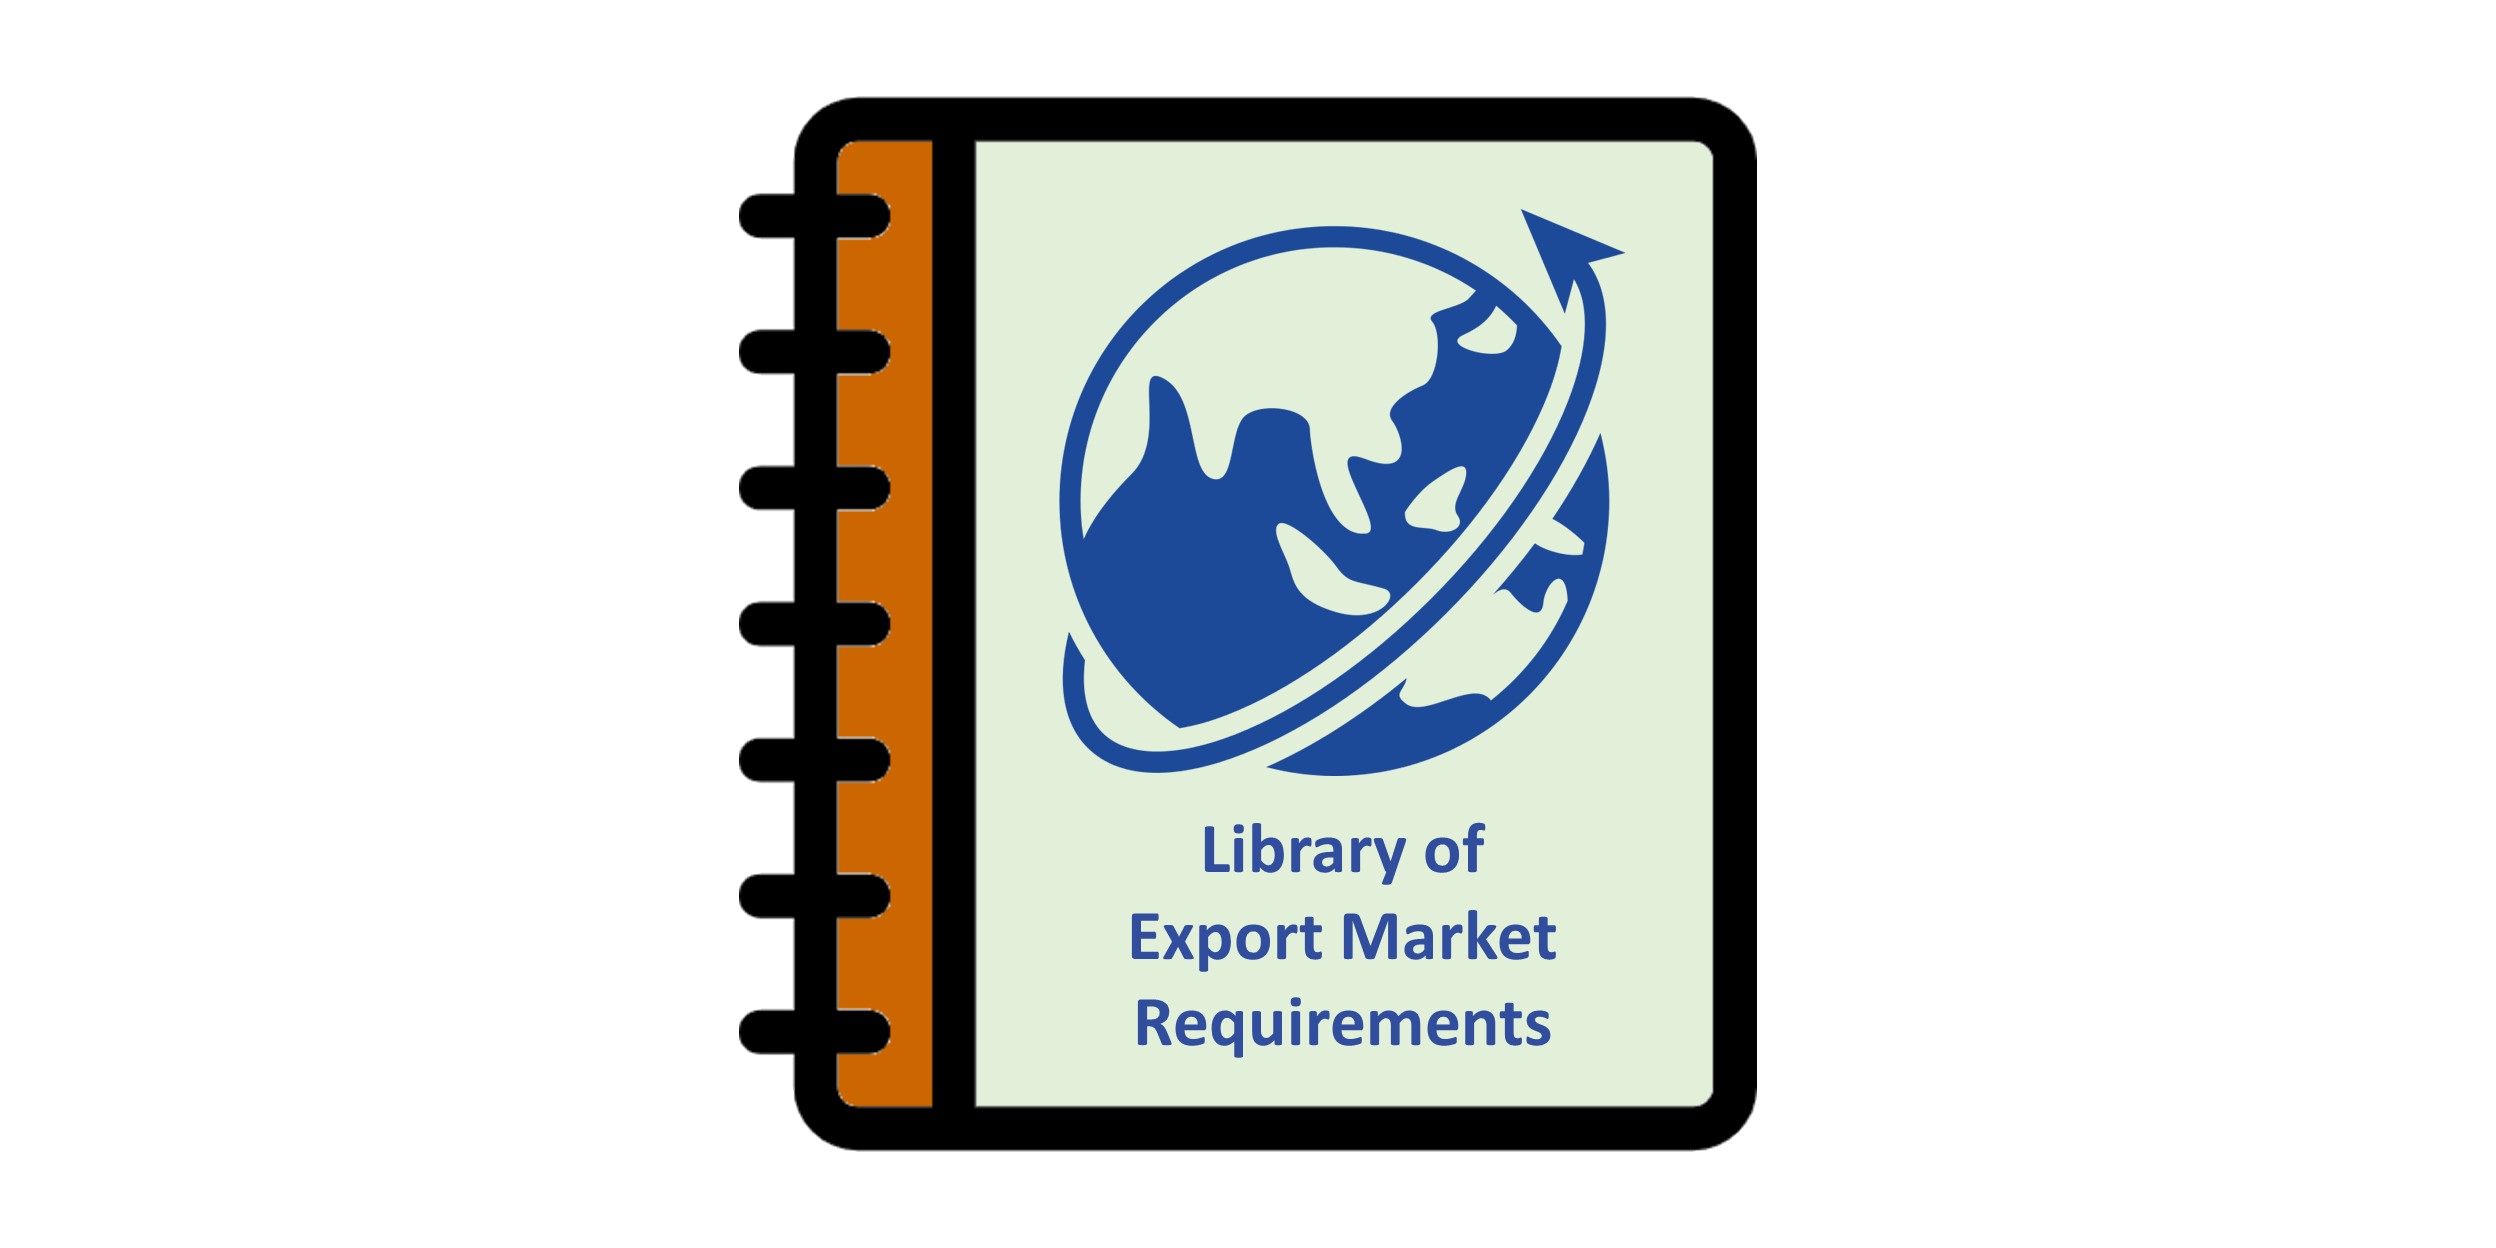 Library of Export Market Requirements